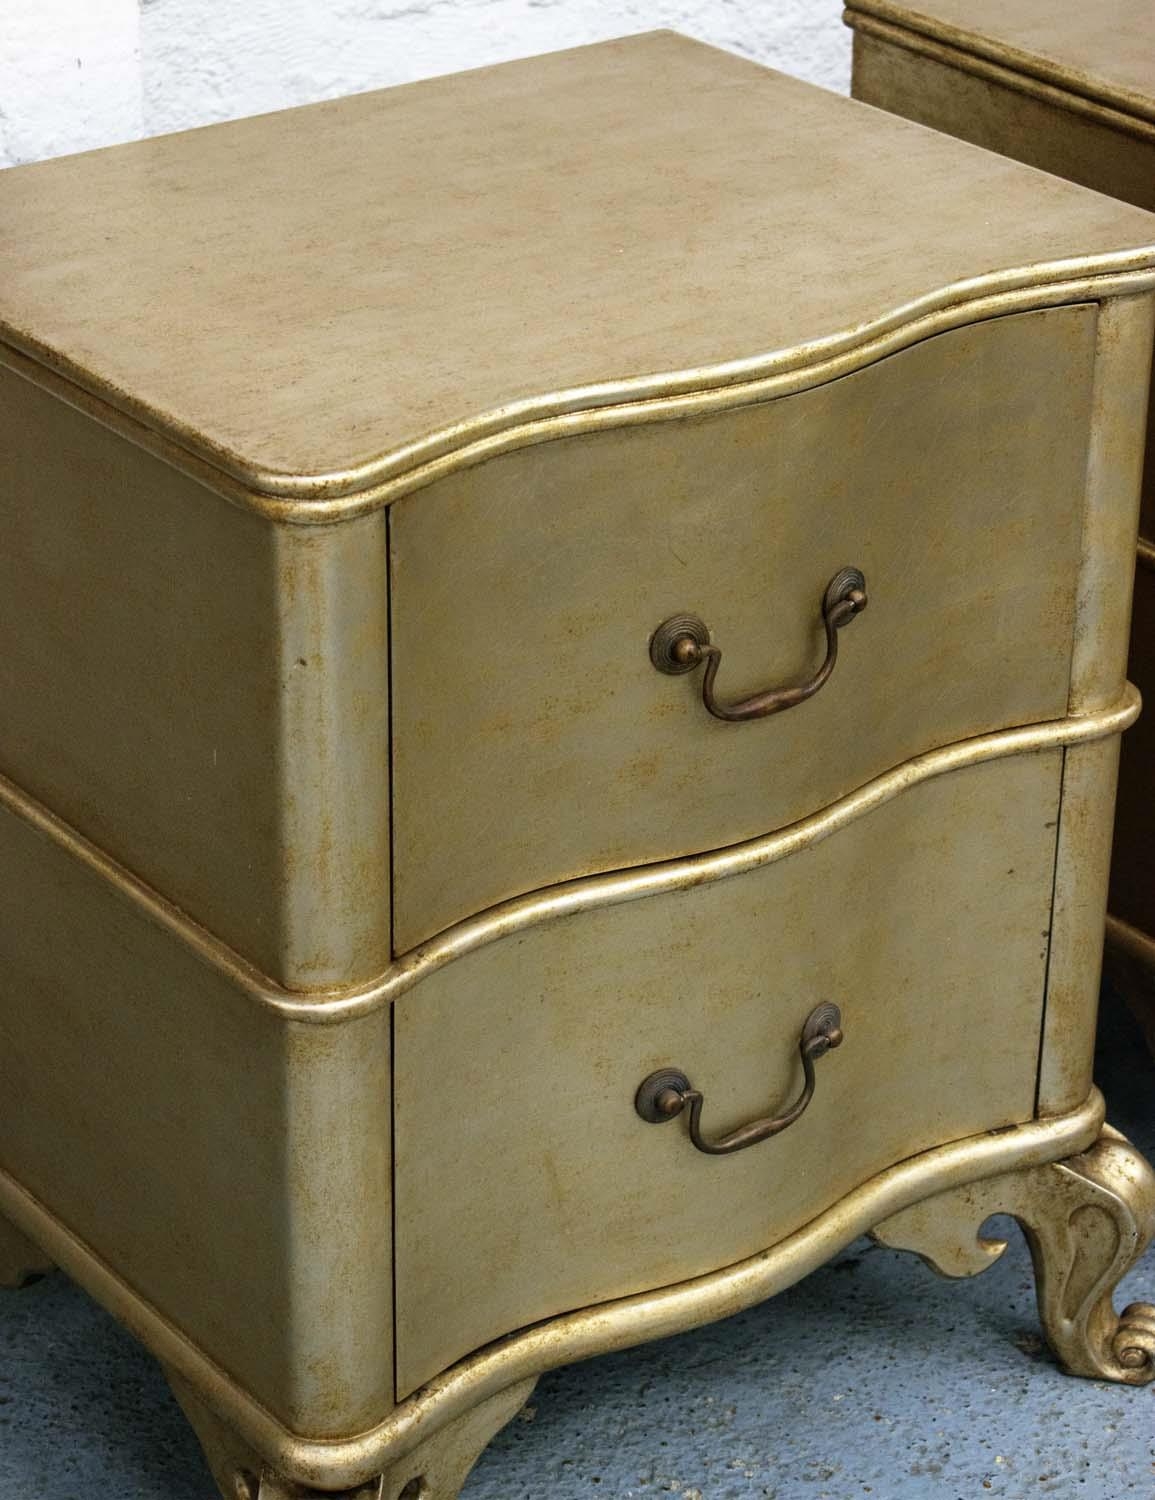 SIDE CHESTS, a pair, 55cm x 44cm x 69cm, contemporary gilt wood, two drawers each. (2) - Image 10 of 24